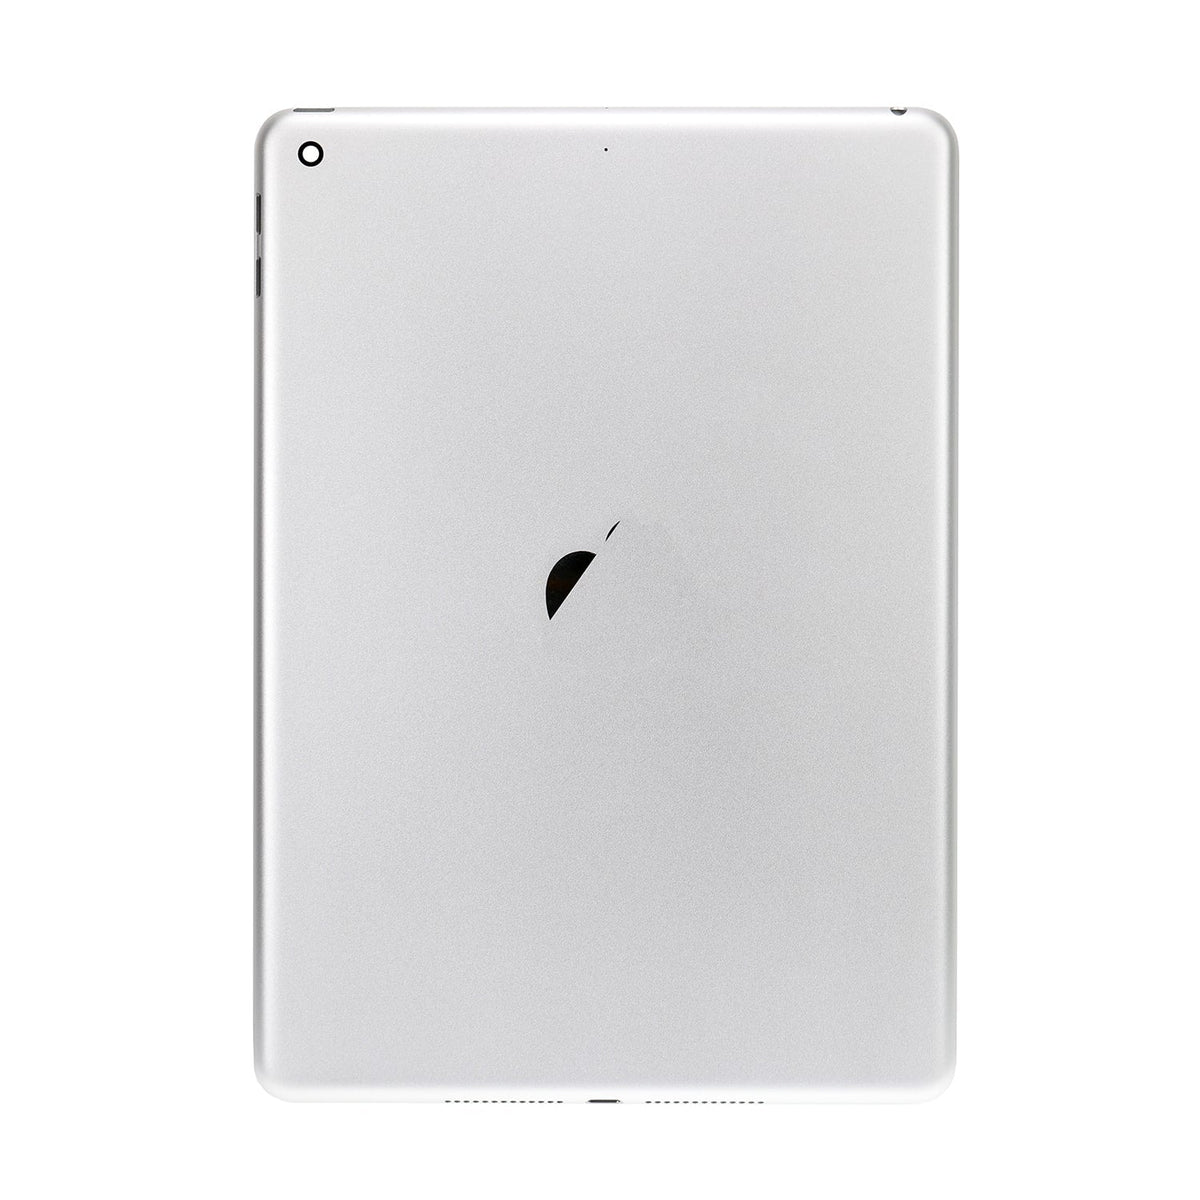 SILVER BACK COVER (WIFI VERSION ) FOR IPAD 5